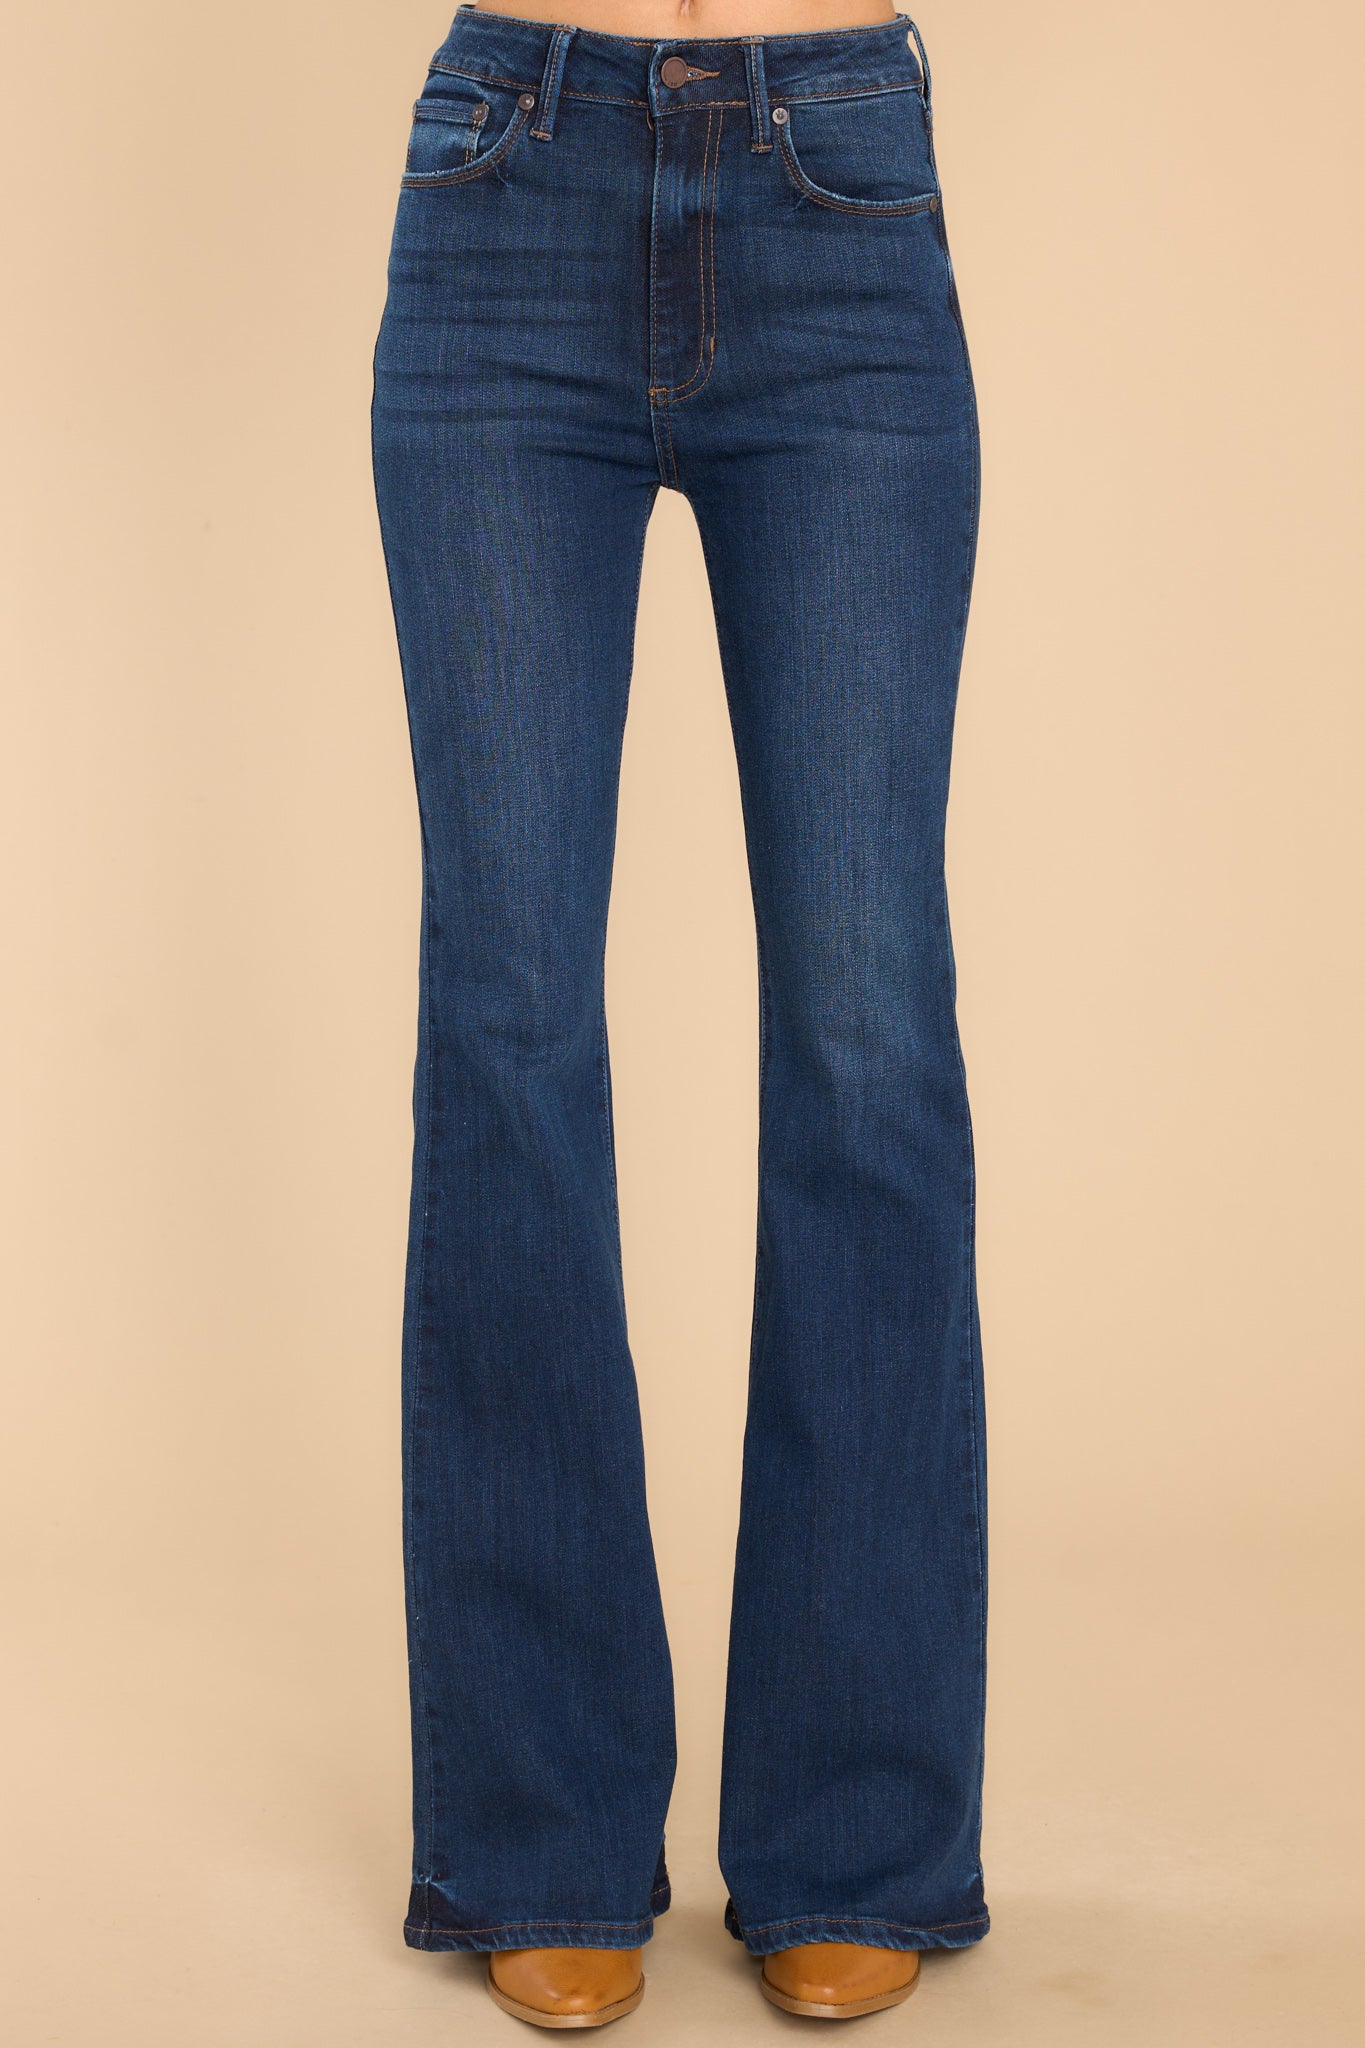 Front view of these jeans that feature a high waist fit, belt loops, zipper and button closure, functional pockets, and a bell bottom flare.